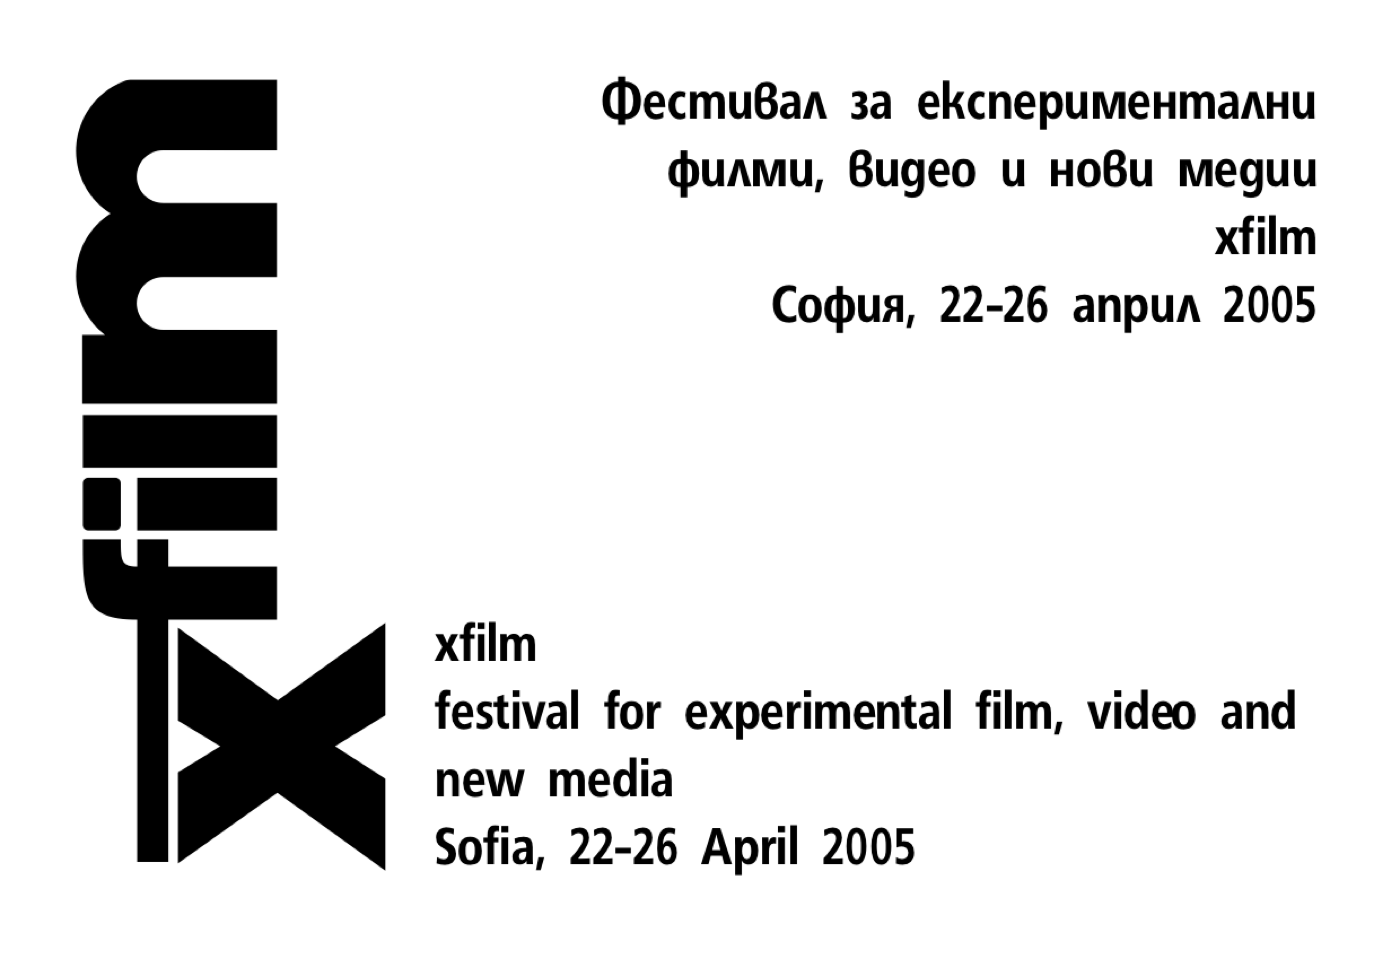 xfilm festival for experimental film, video and new media, was held in Sofia in April 2005